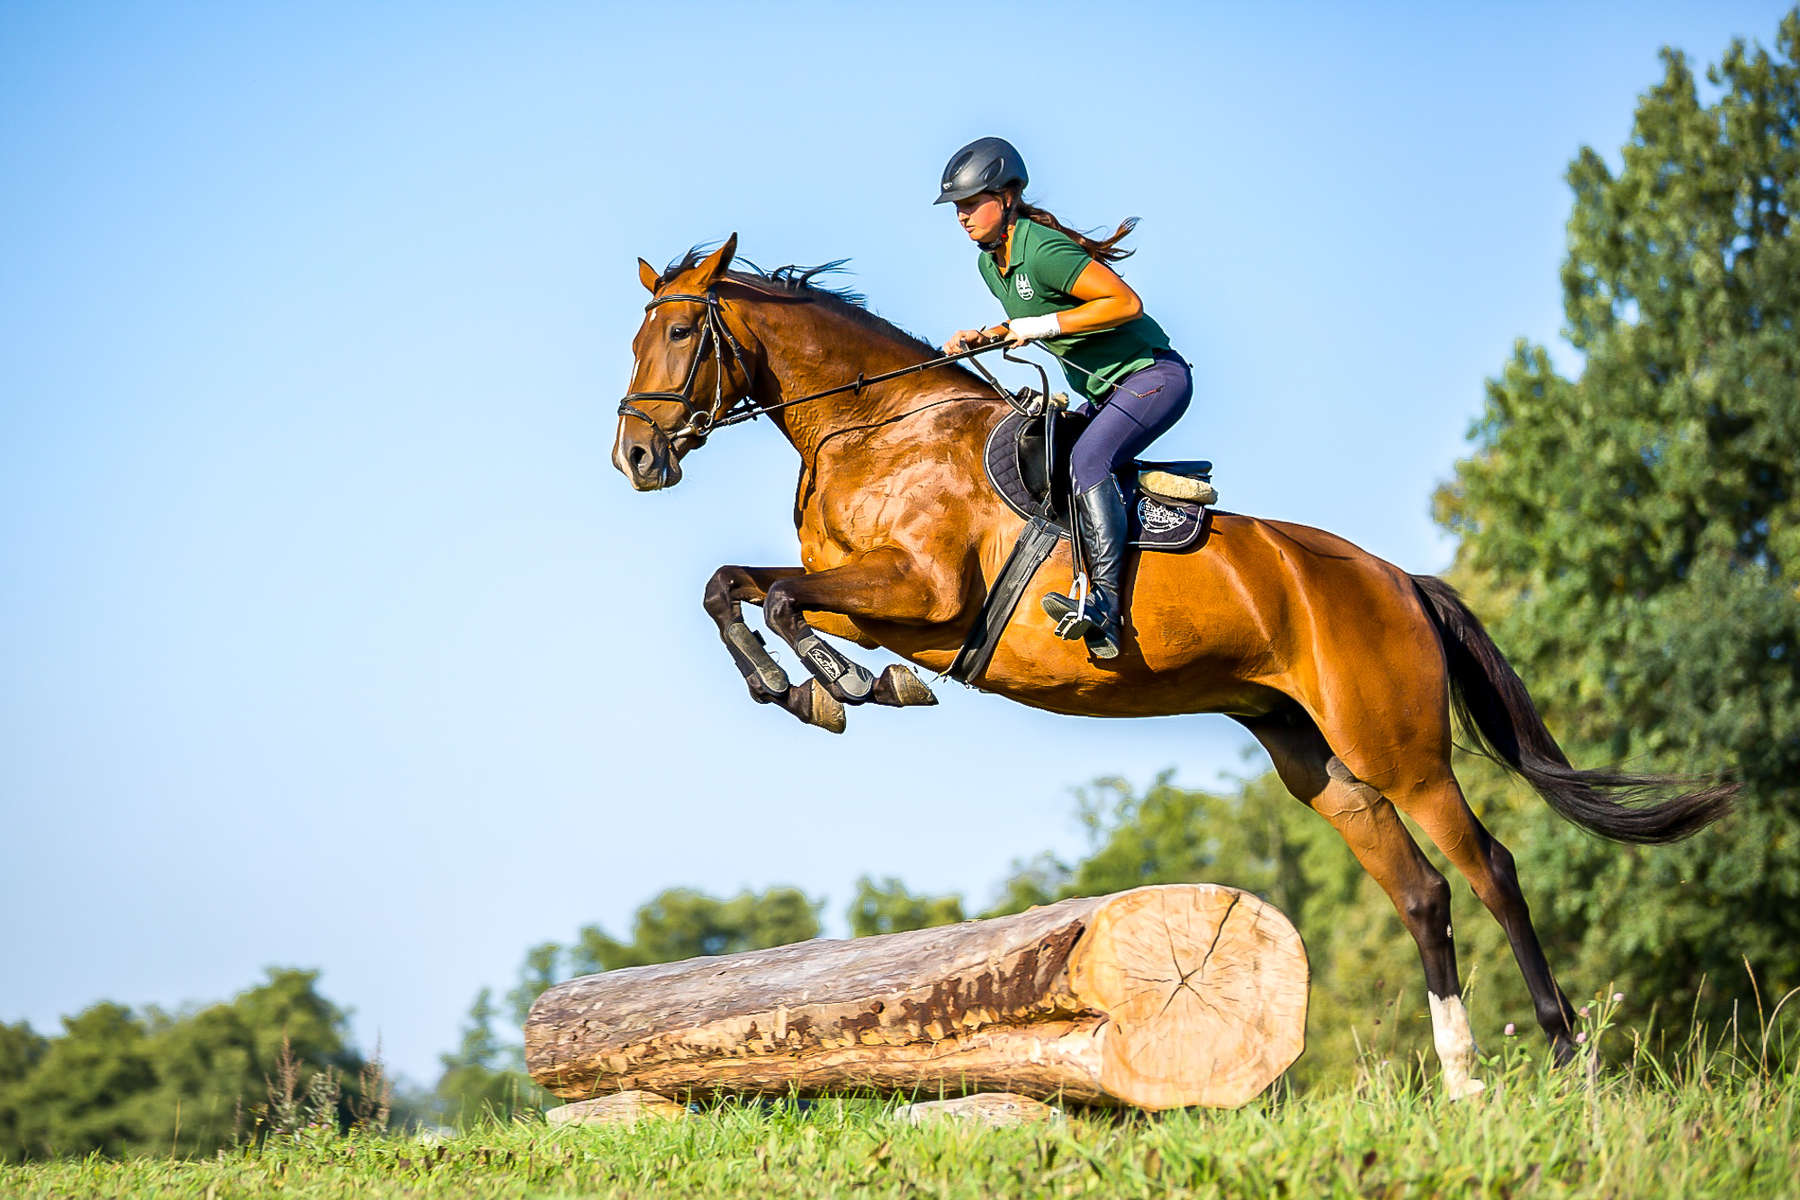 Rider jumping a log in a field in Poland